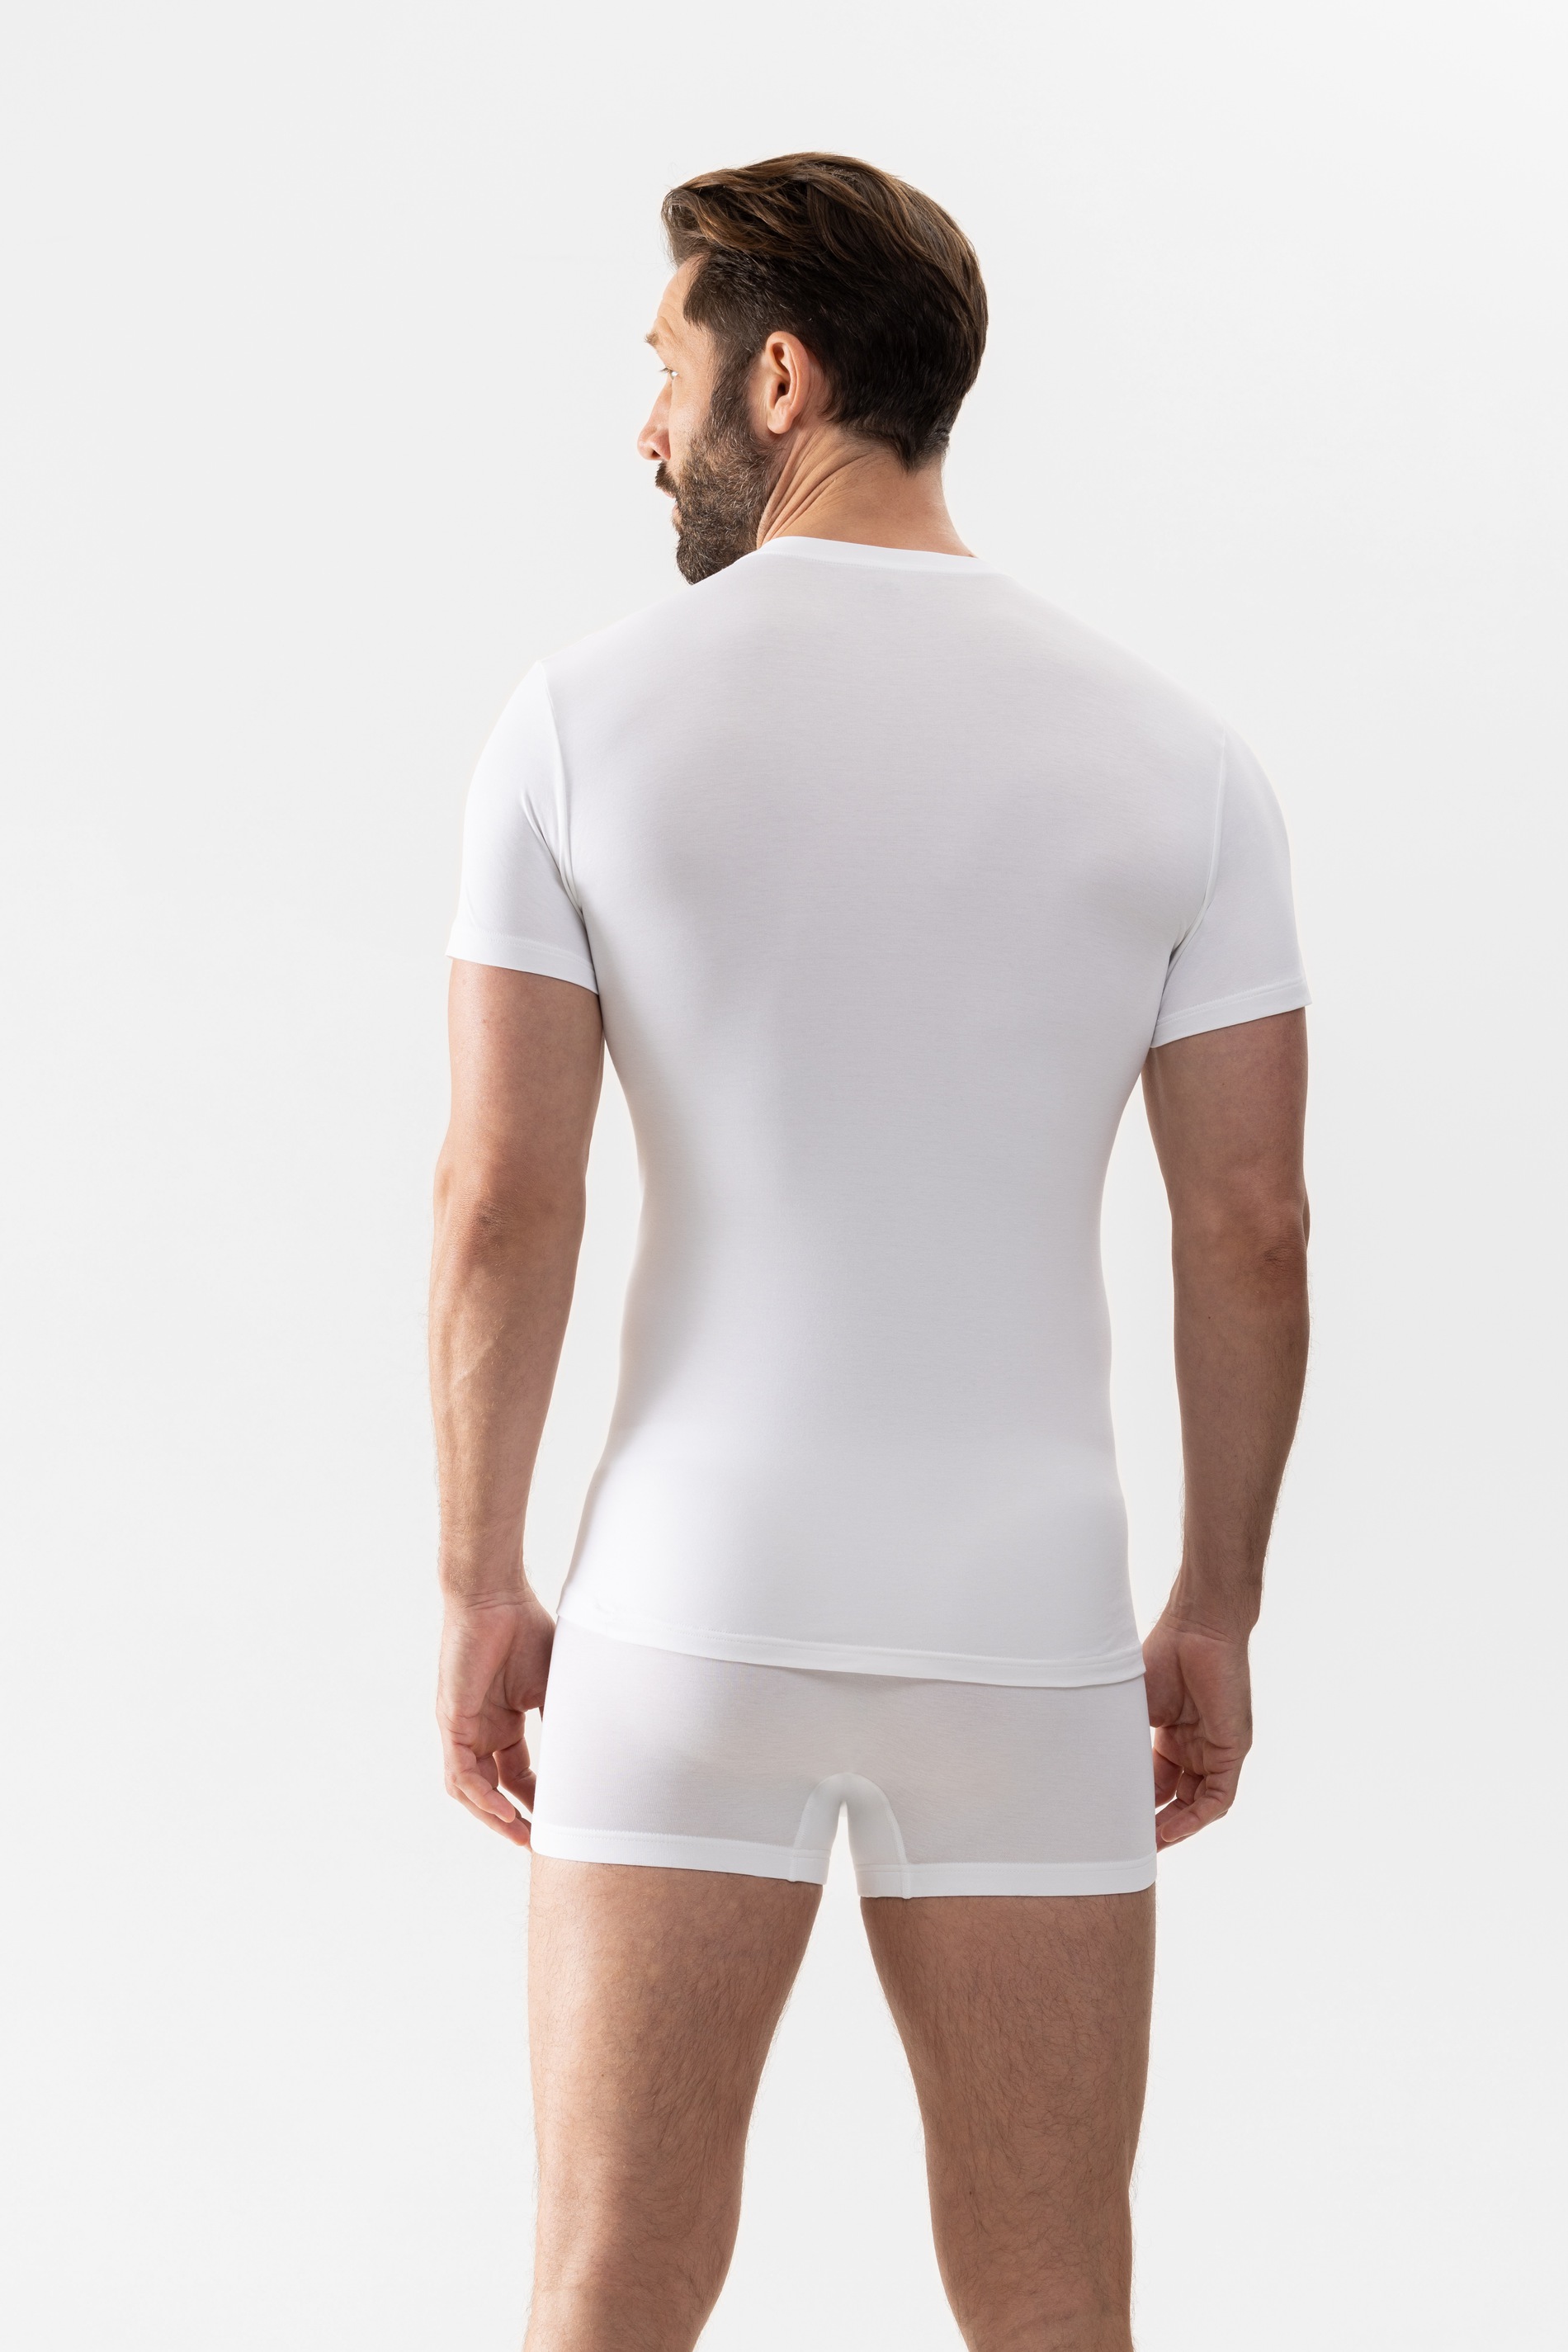 Olympic shirt White Serie Software Rear View | mey®